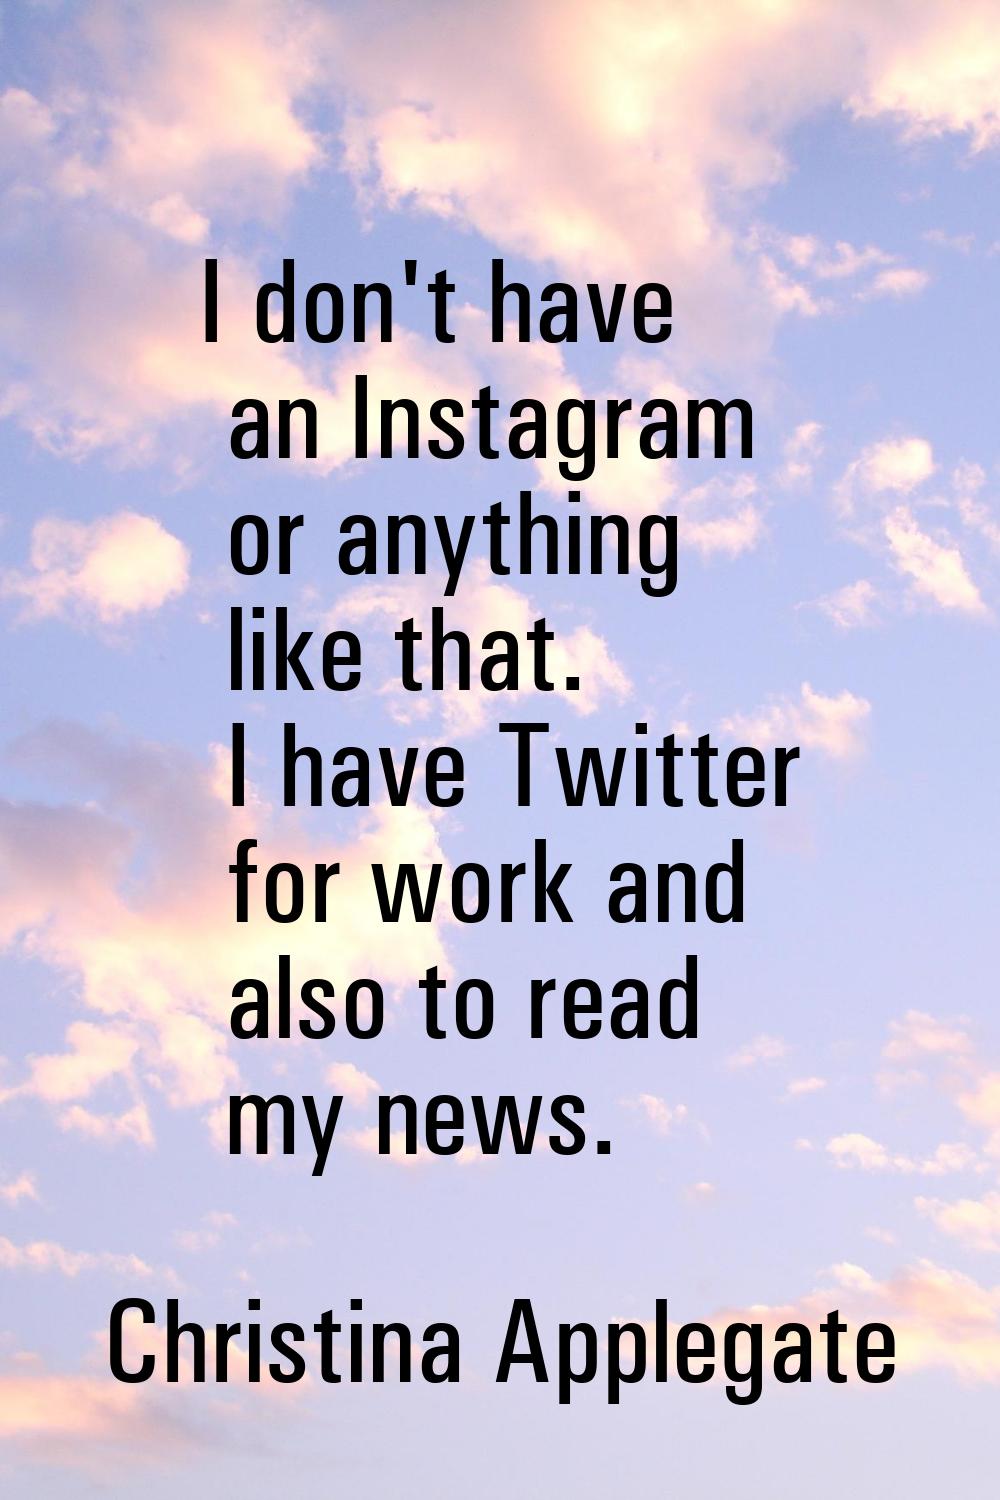 I don't have an Instagram or anything like that. I have Twitter for work and also to read my news.